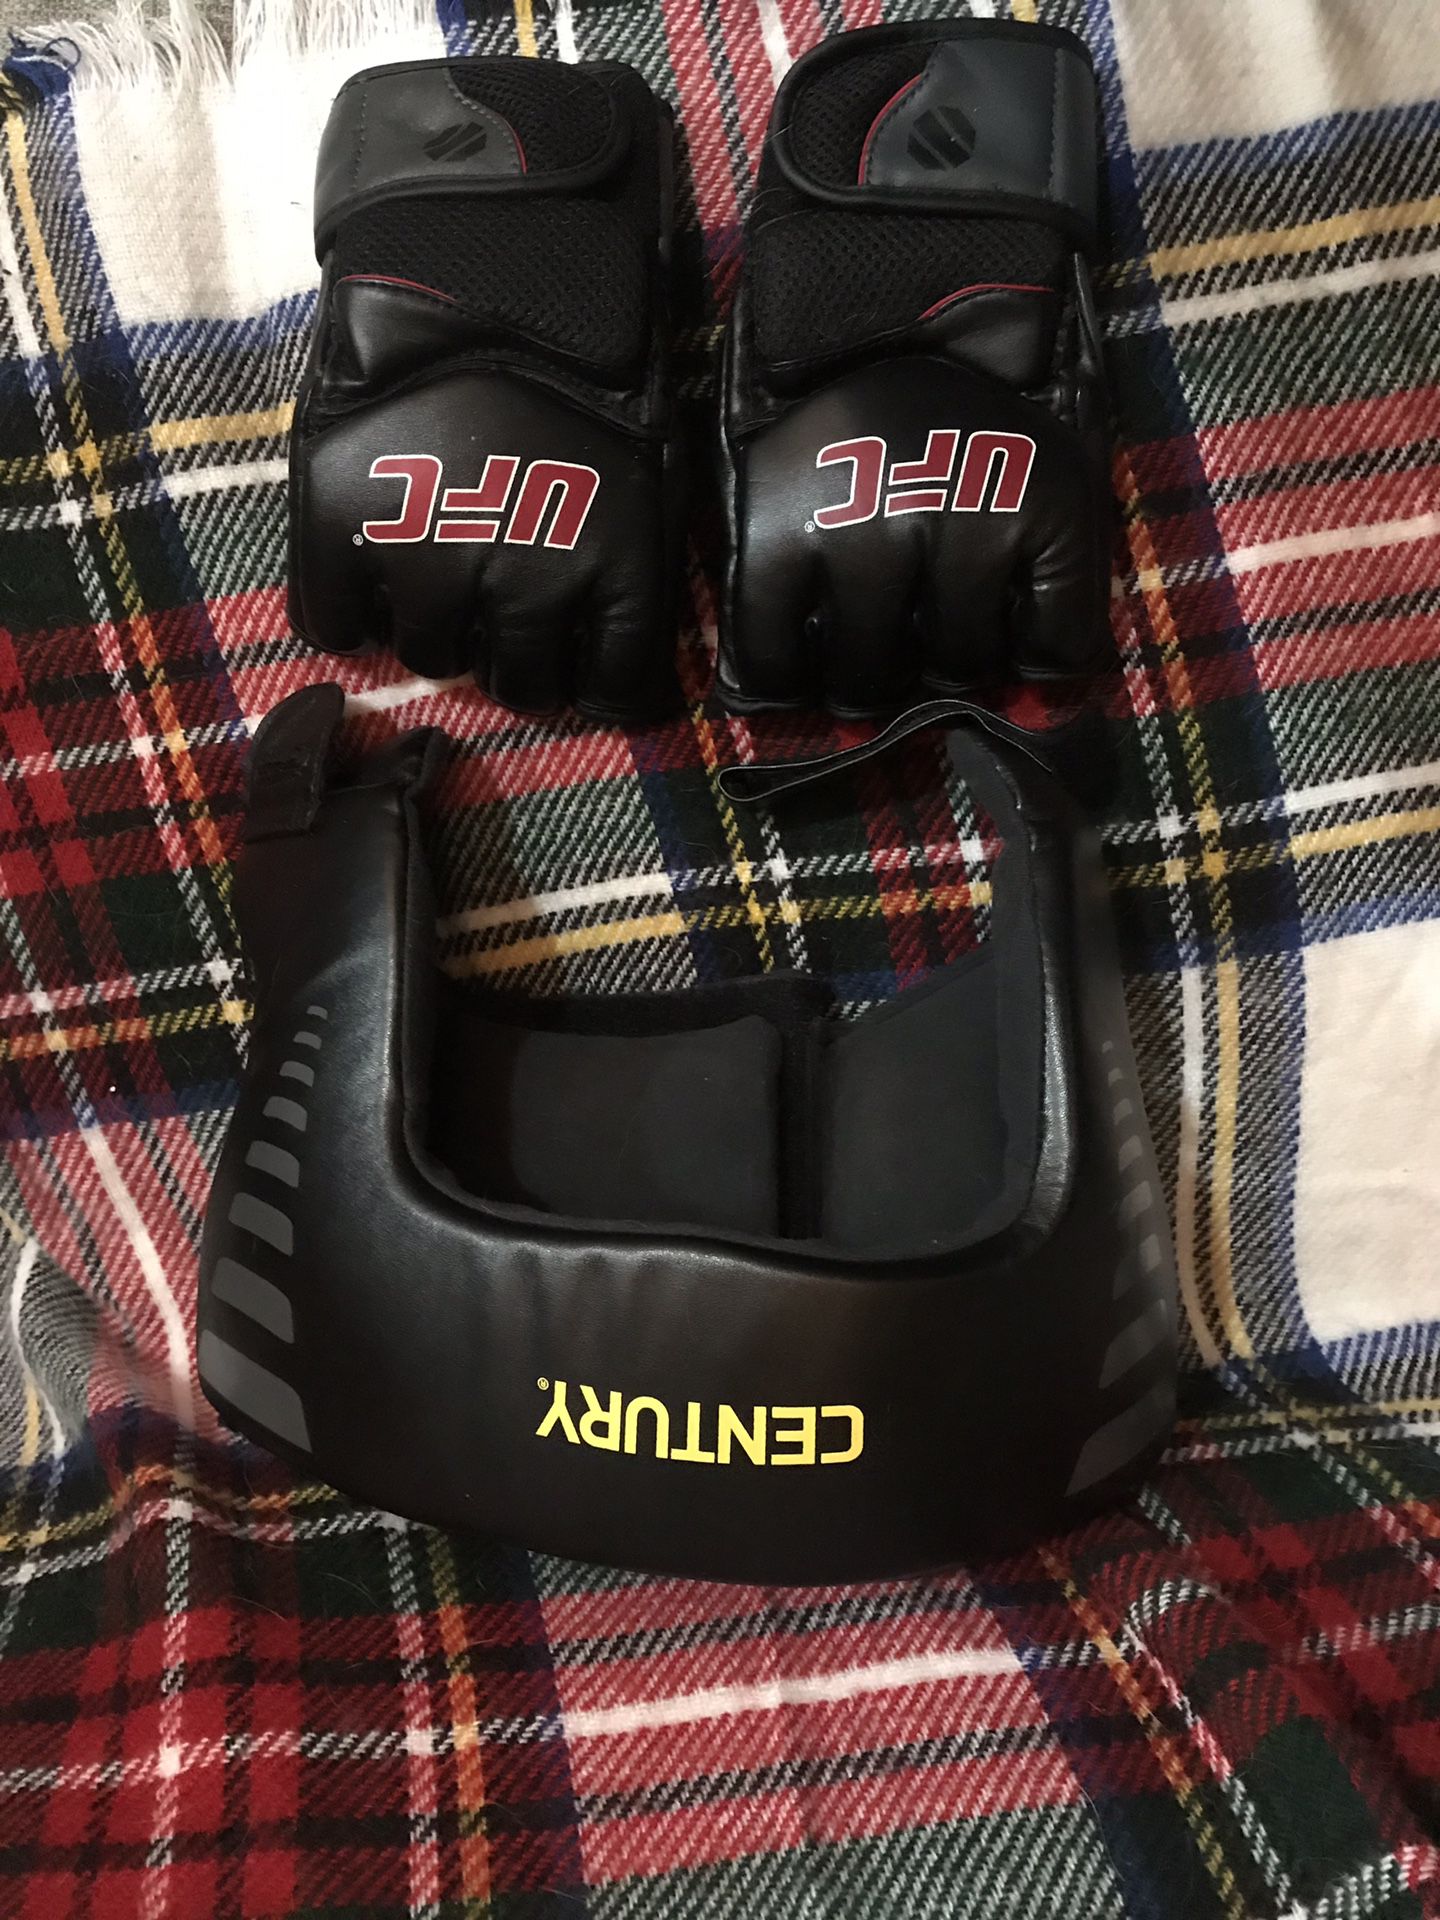 UFC sparing gloves and head gear